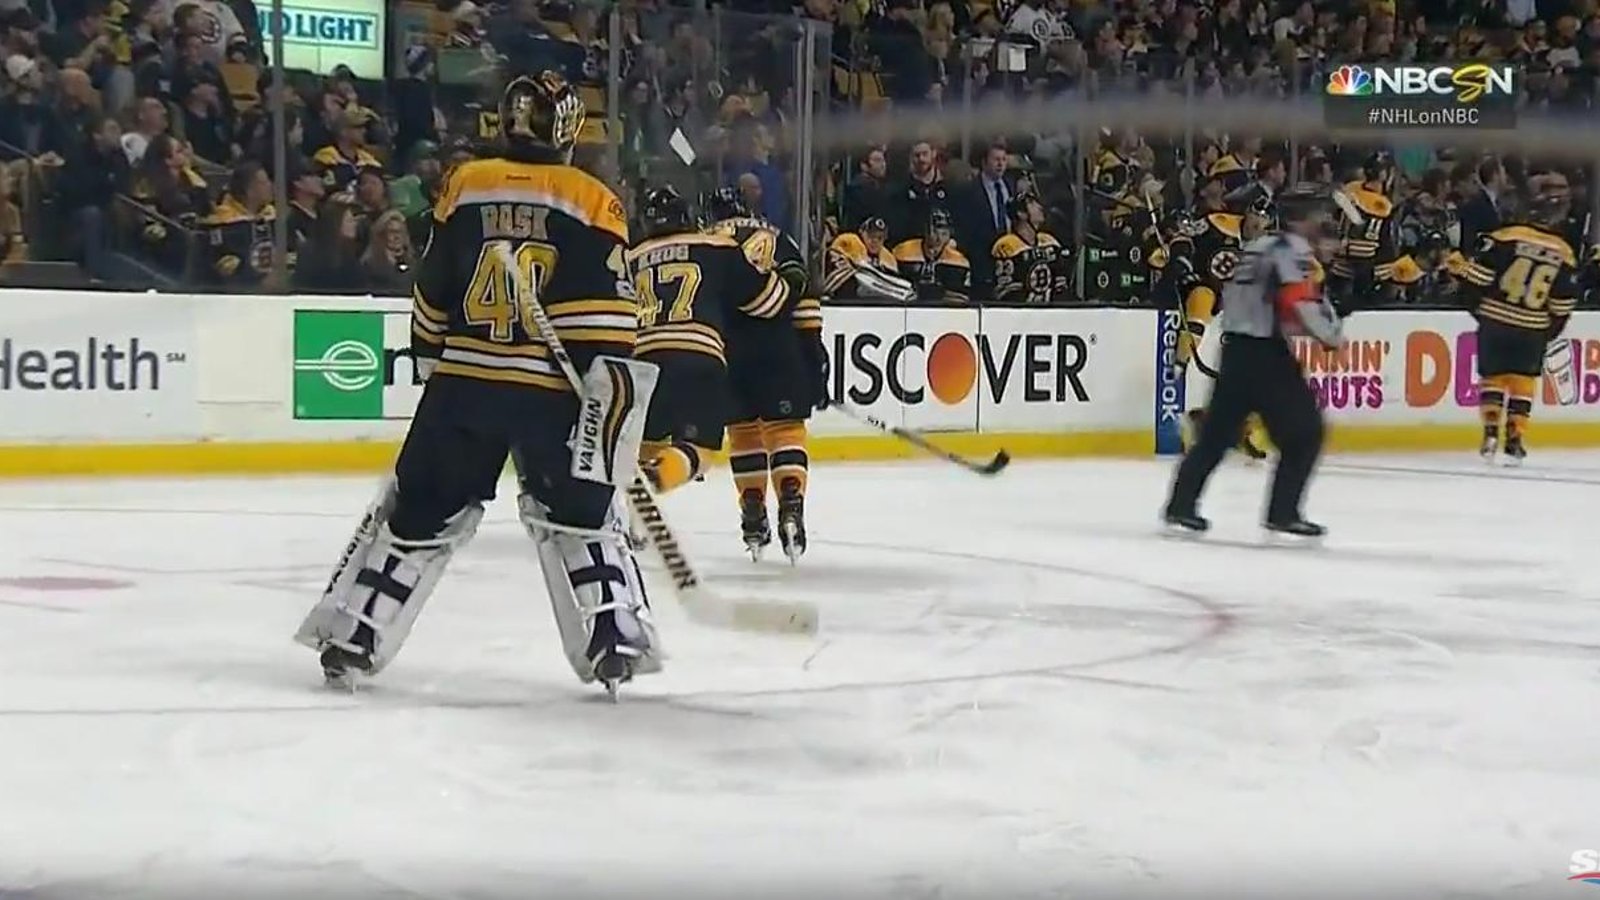 McQuaid injured, Rask and Krug to the rescue! 